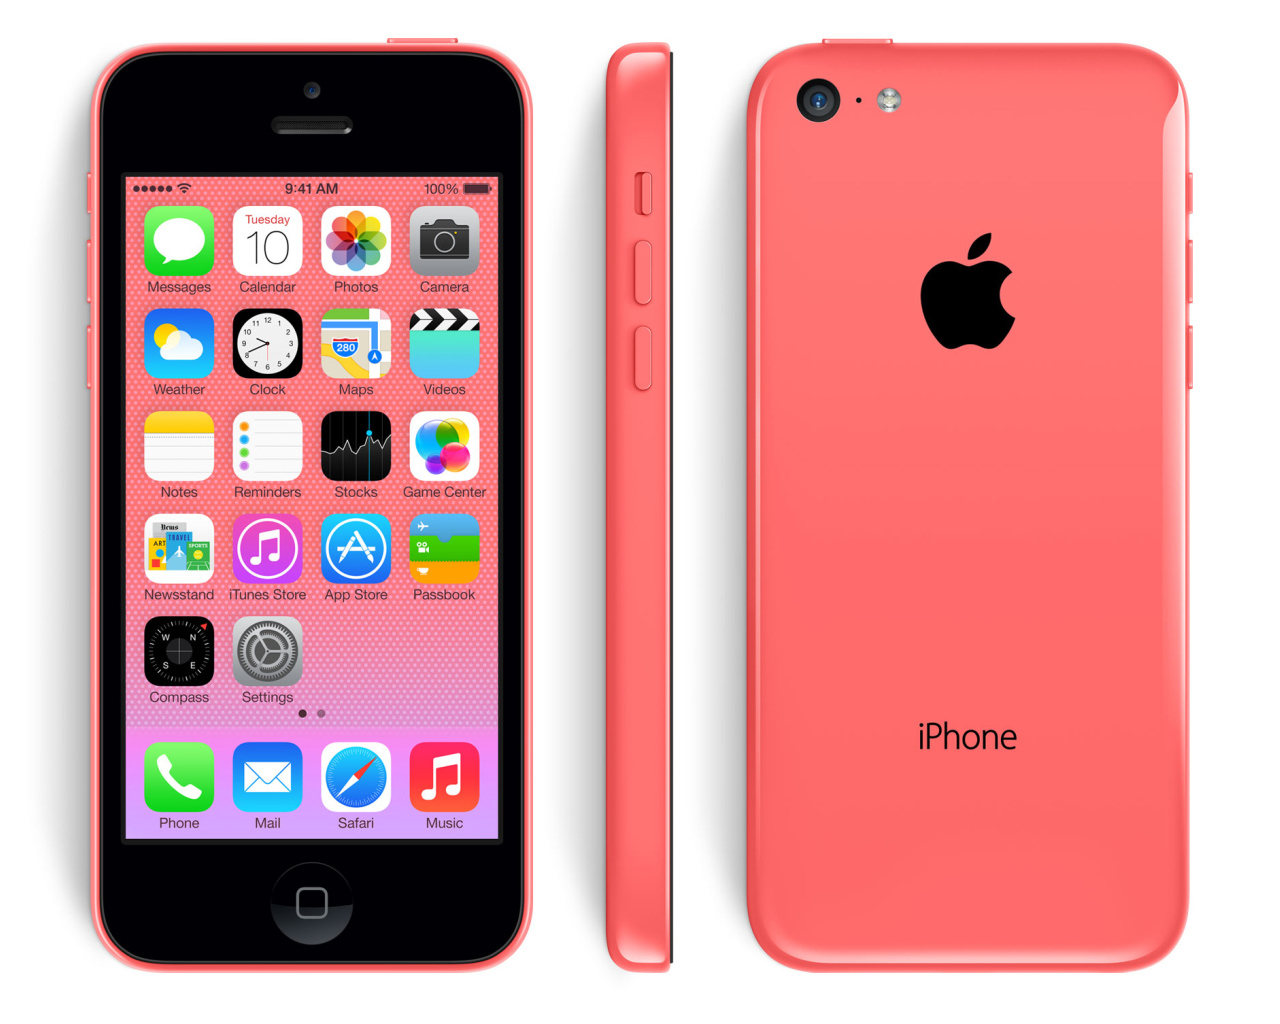 New beautiful Iphone 5C on a white background